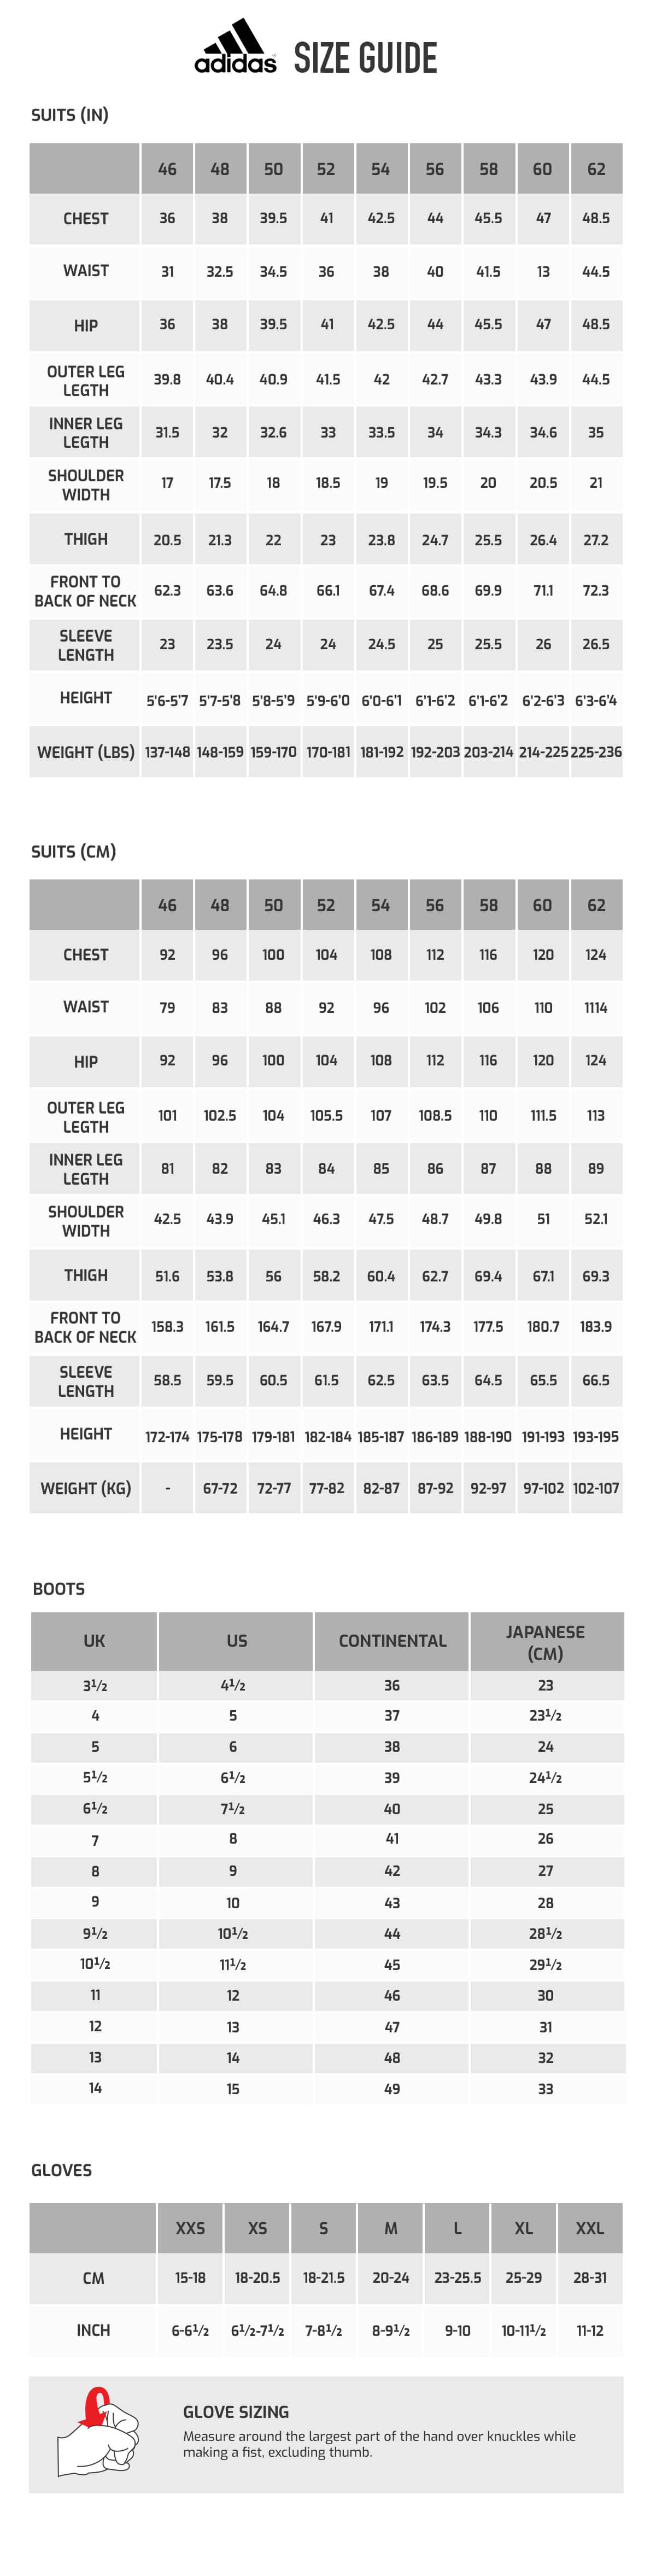 adidas boots size guide